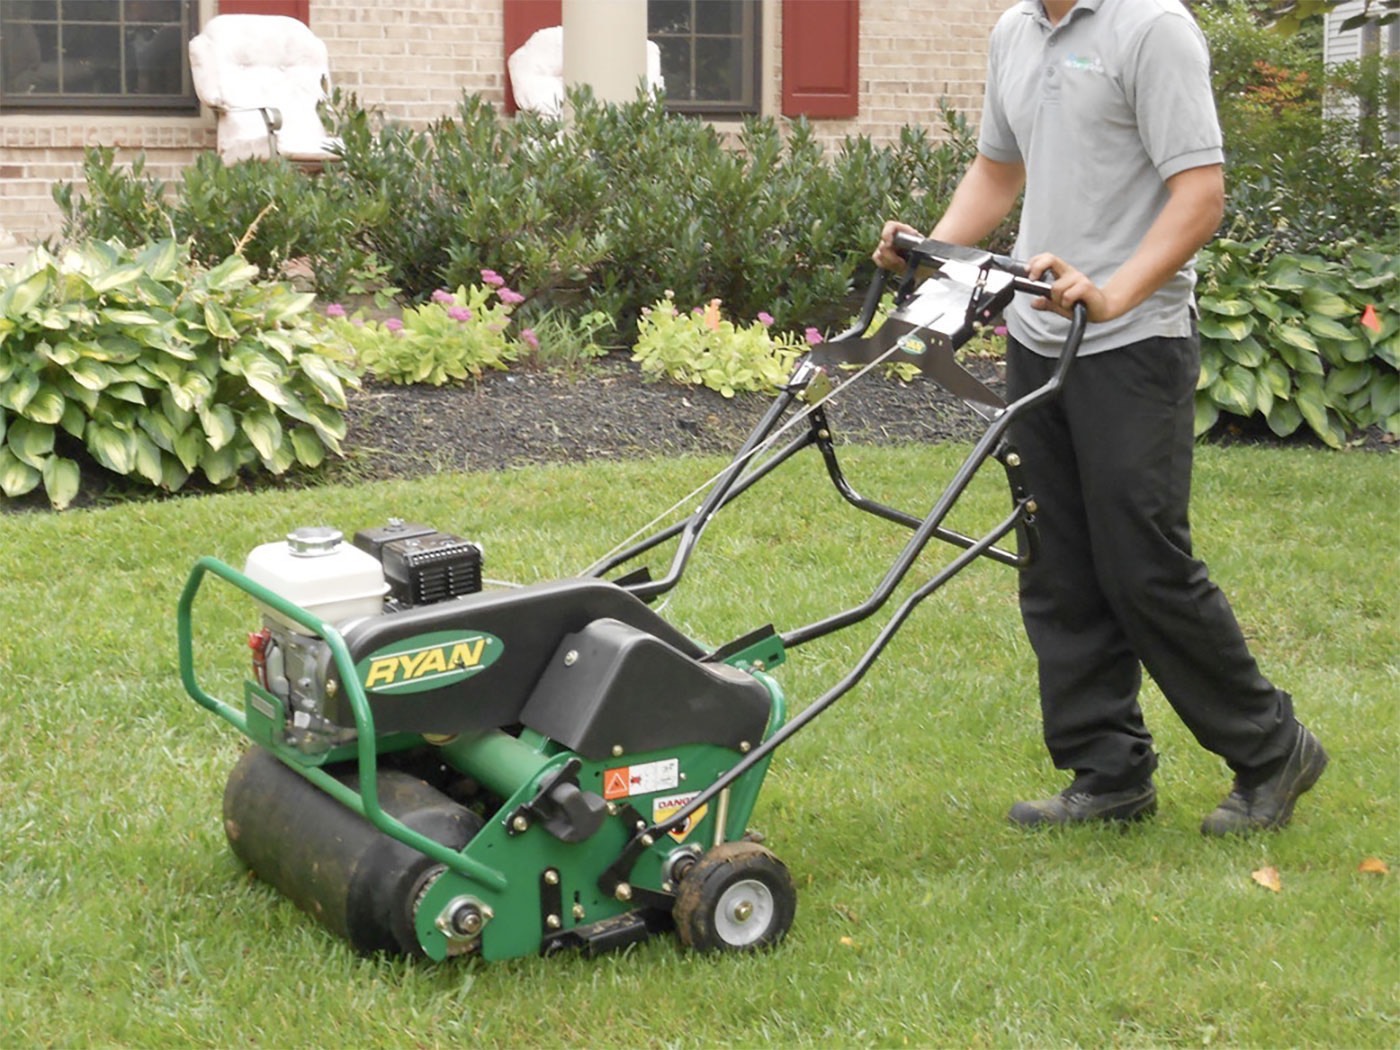 Man with gray shirt and black pants using the lawn mower